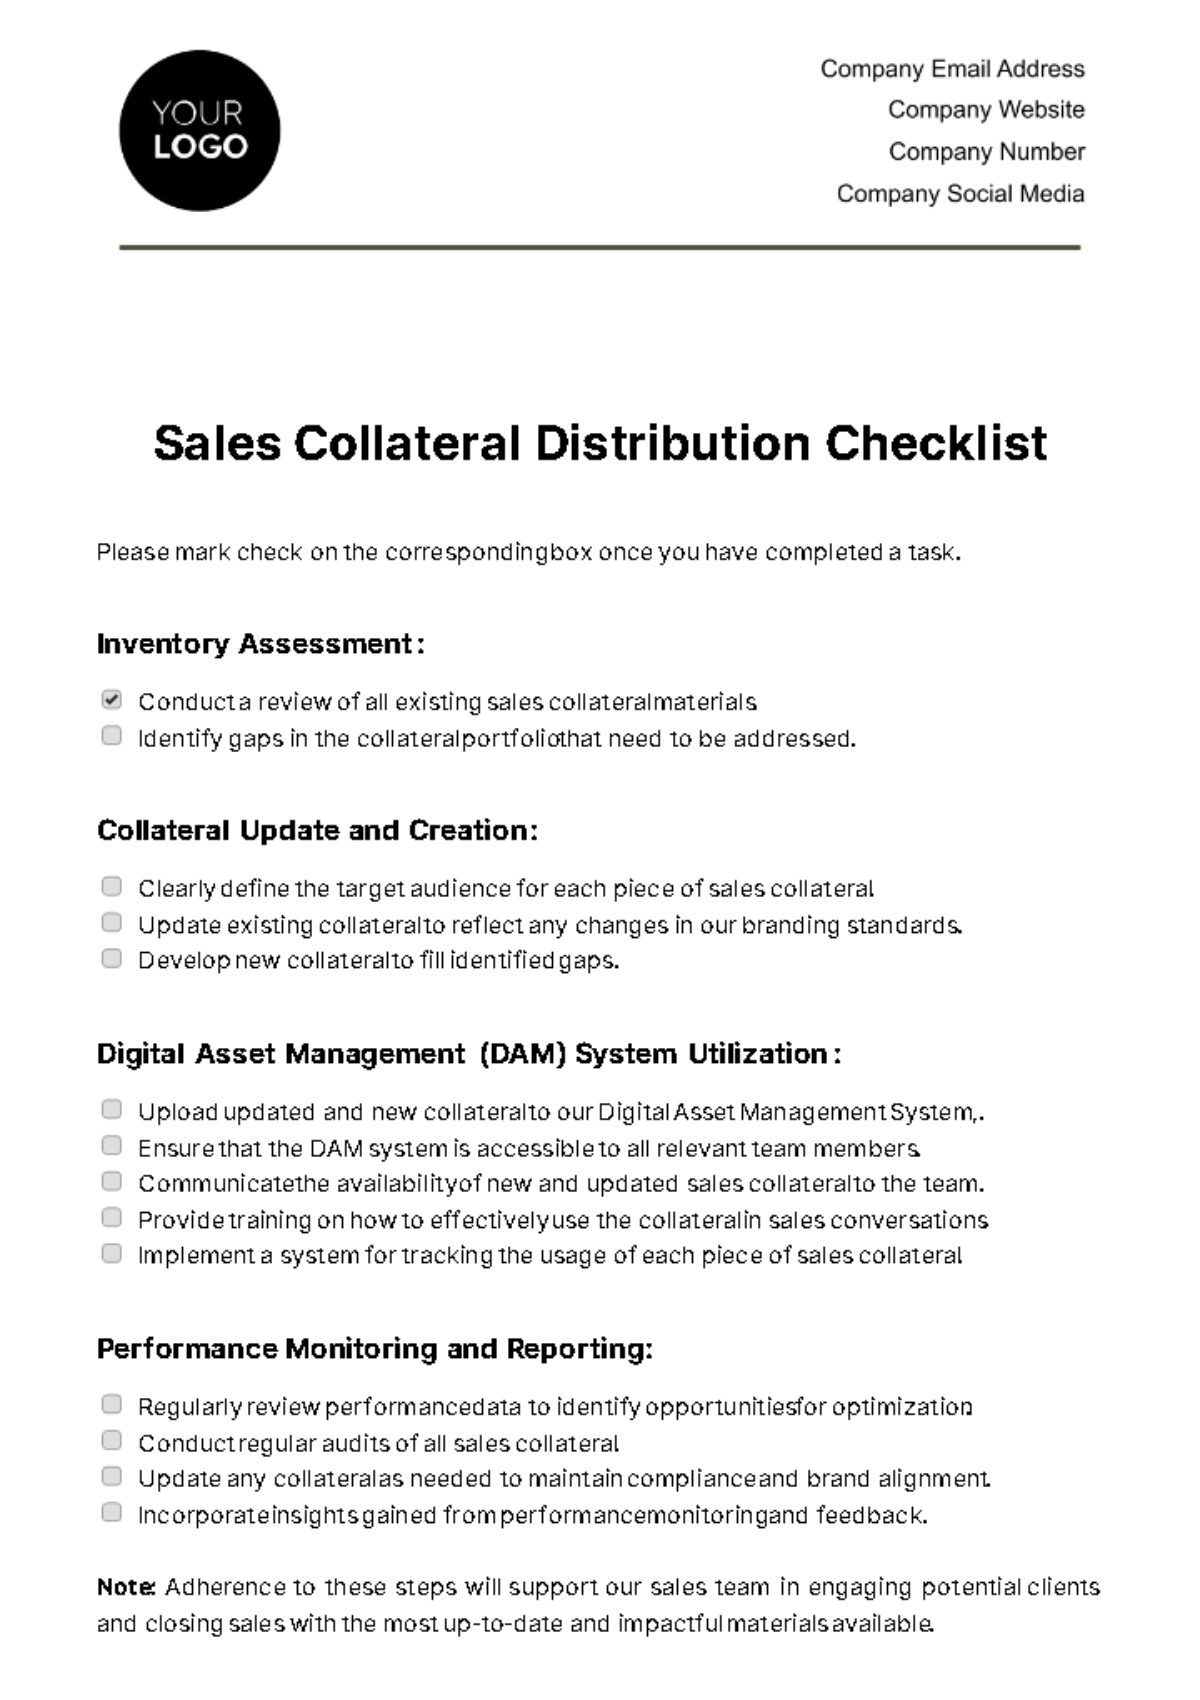 Sales Collateral Distribution Checklist Template